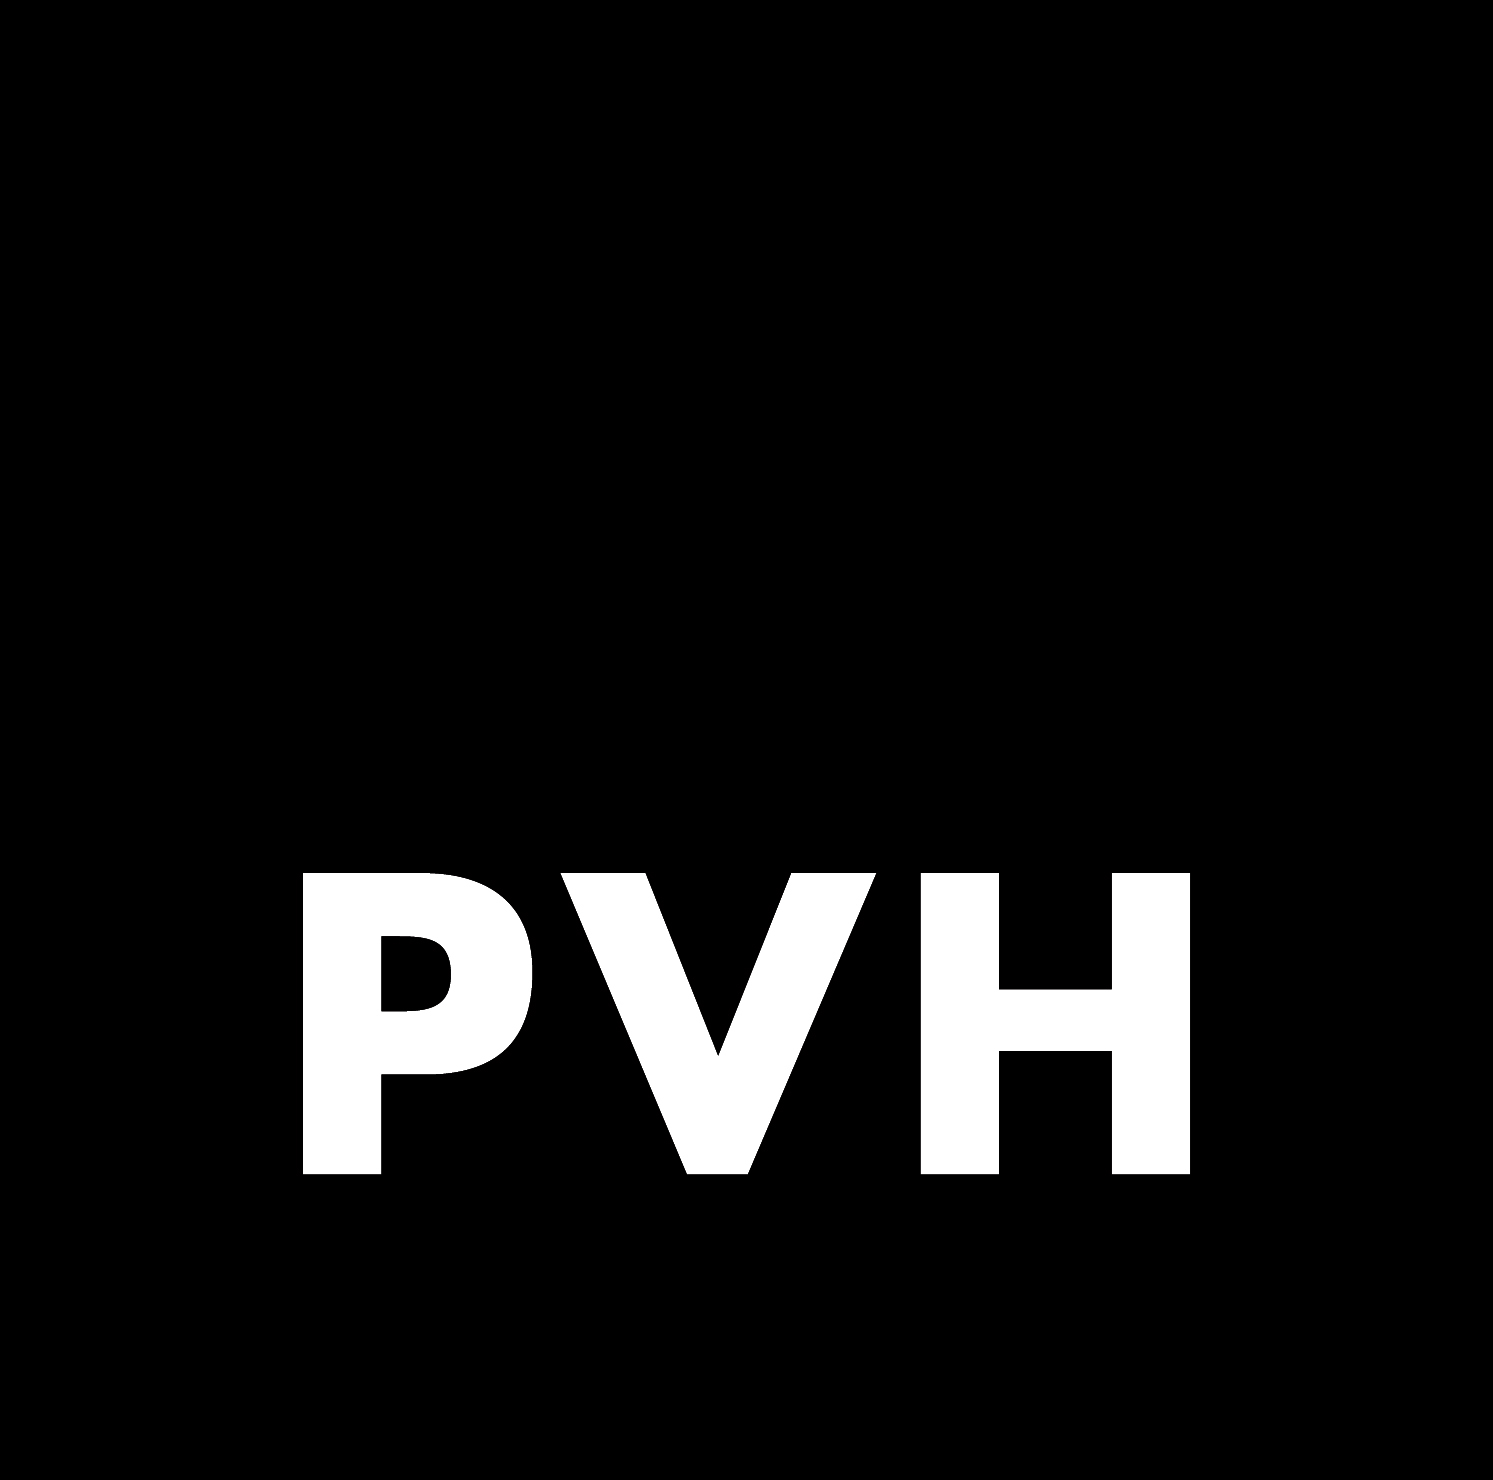 PVH is selling Heritage business to Authentic Brands Group